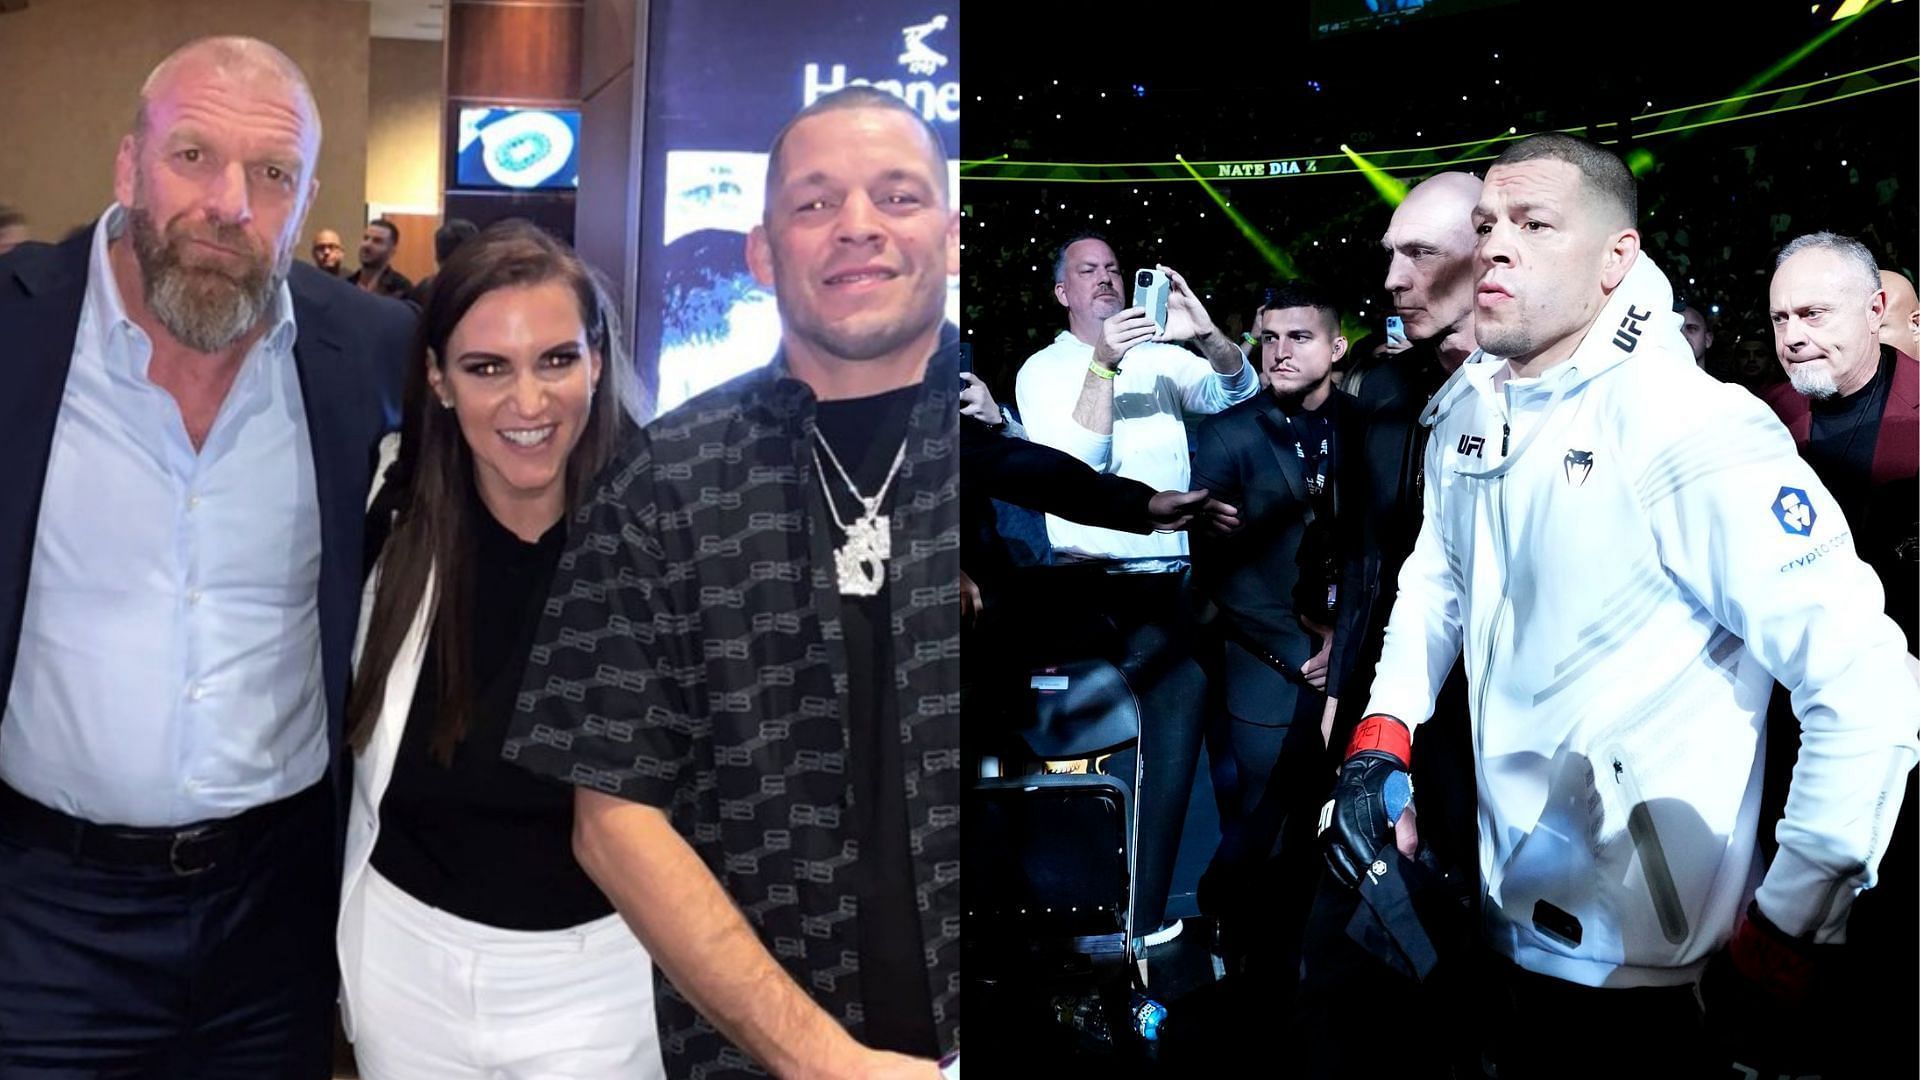 Nate Diaz was recently photographed with Triple H and Stephanie McMahon